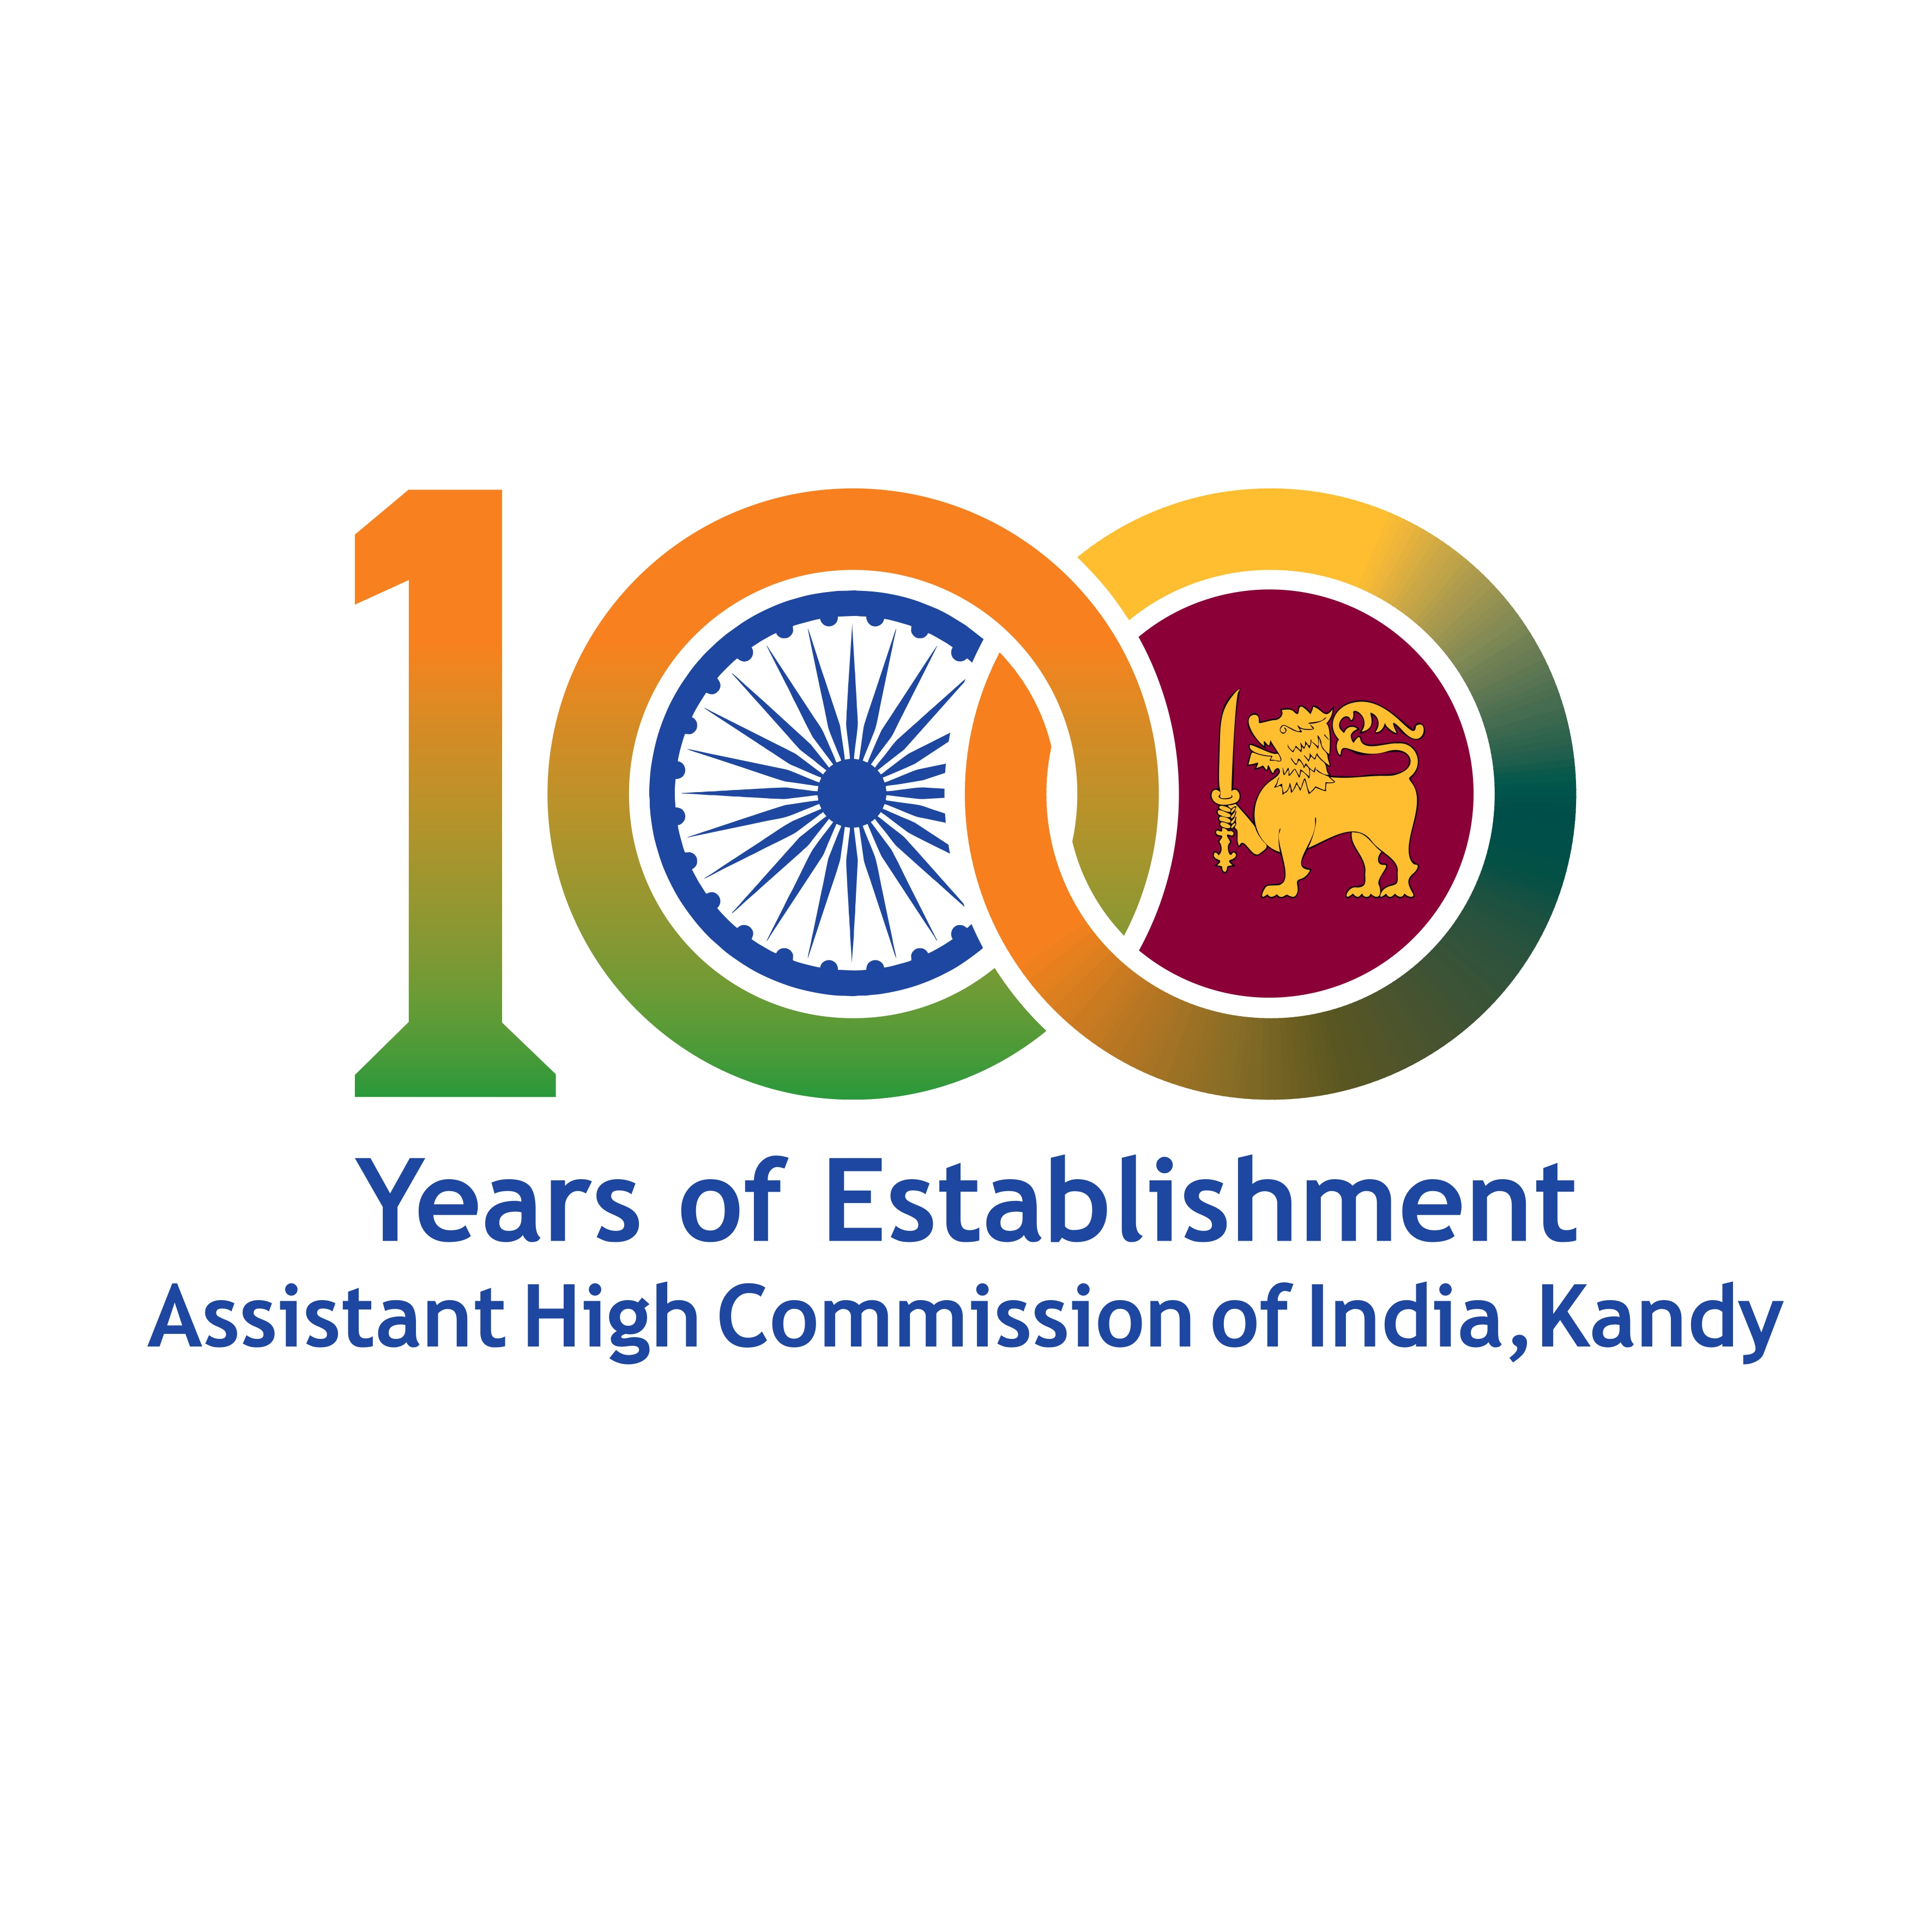 Logo launch to mark 100 years of establishment of Assistant High Commission of India, Kandy